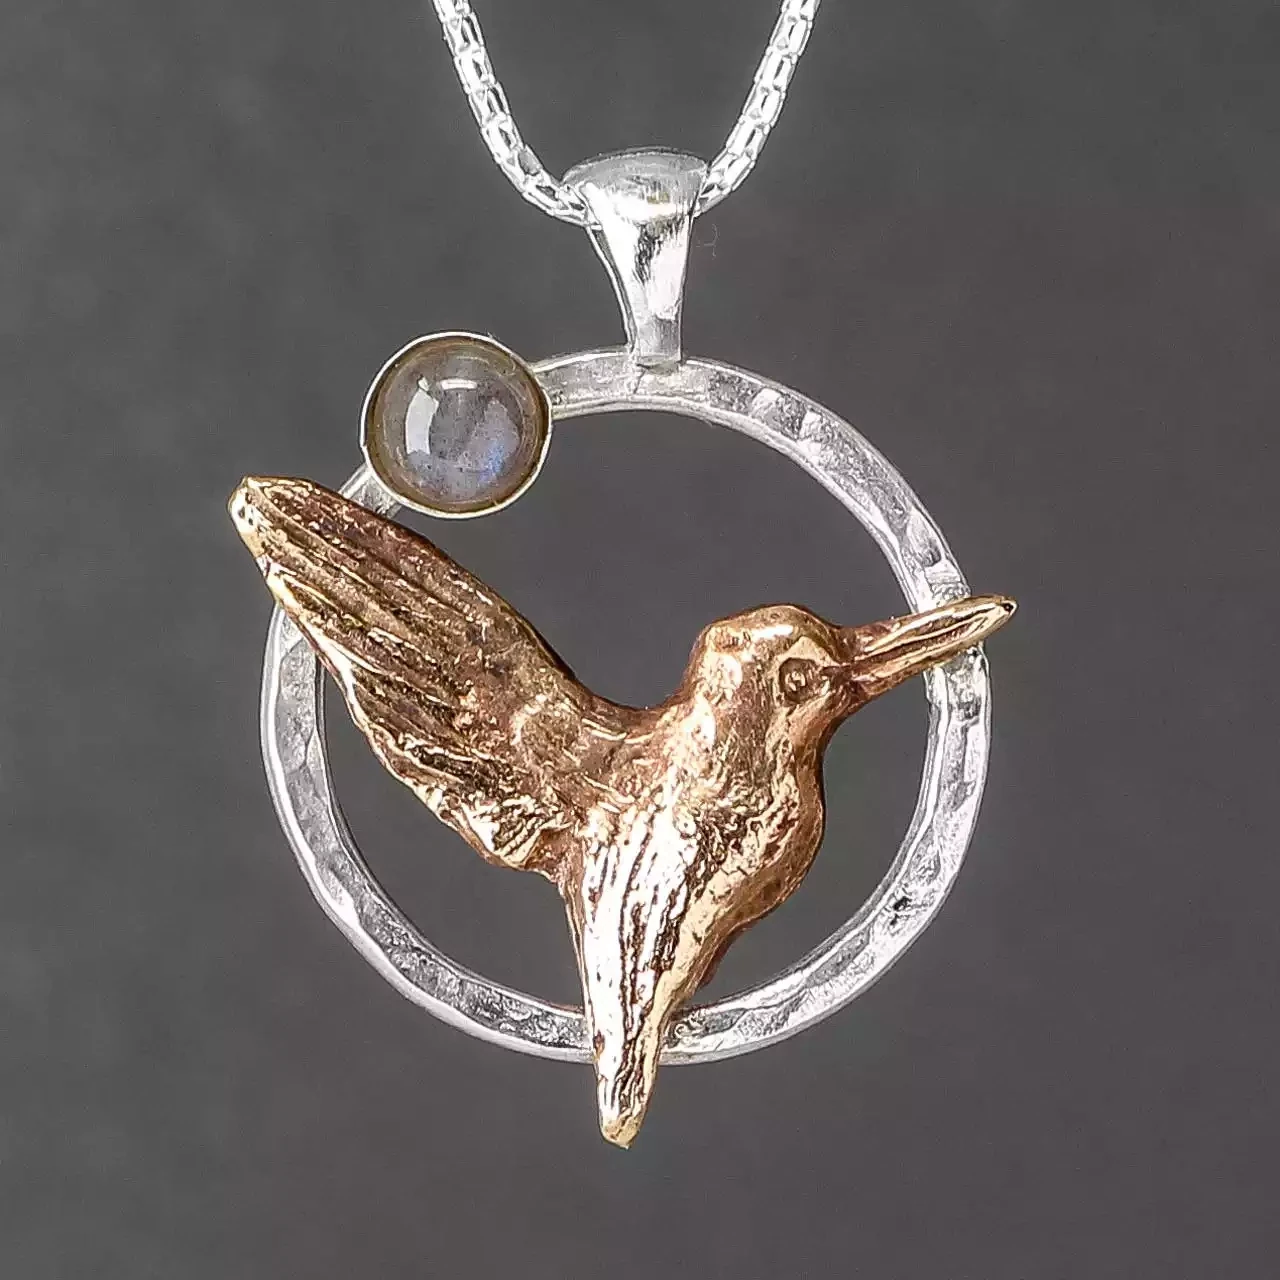 Kingfisher and Moon Silver and Bronze Circle Pendant by Xuella Arnold